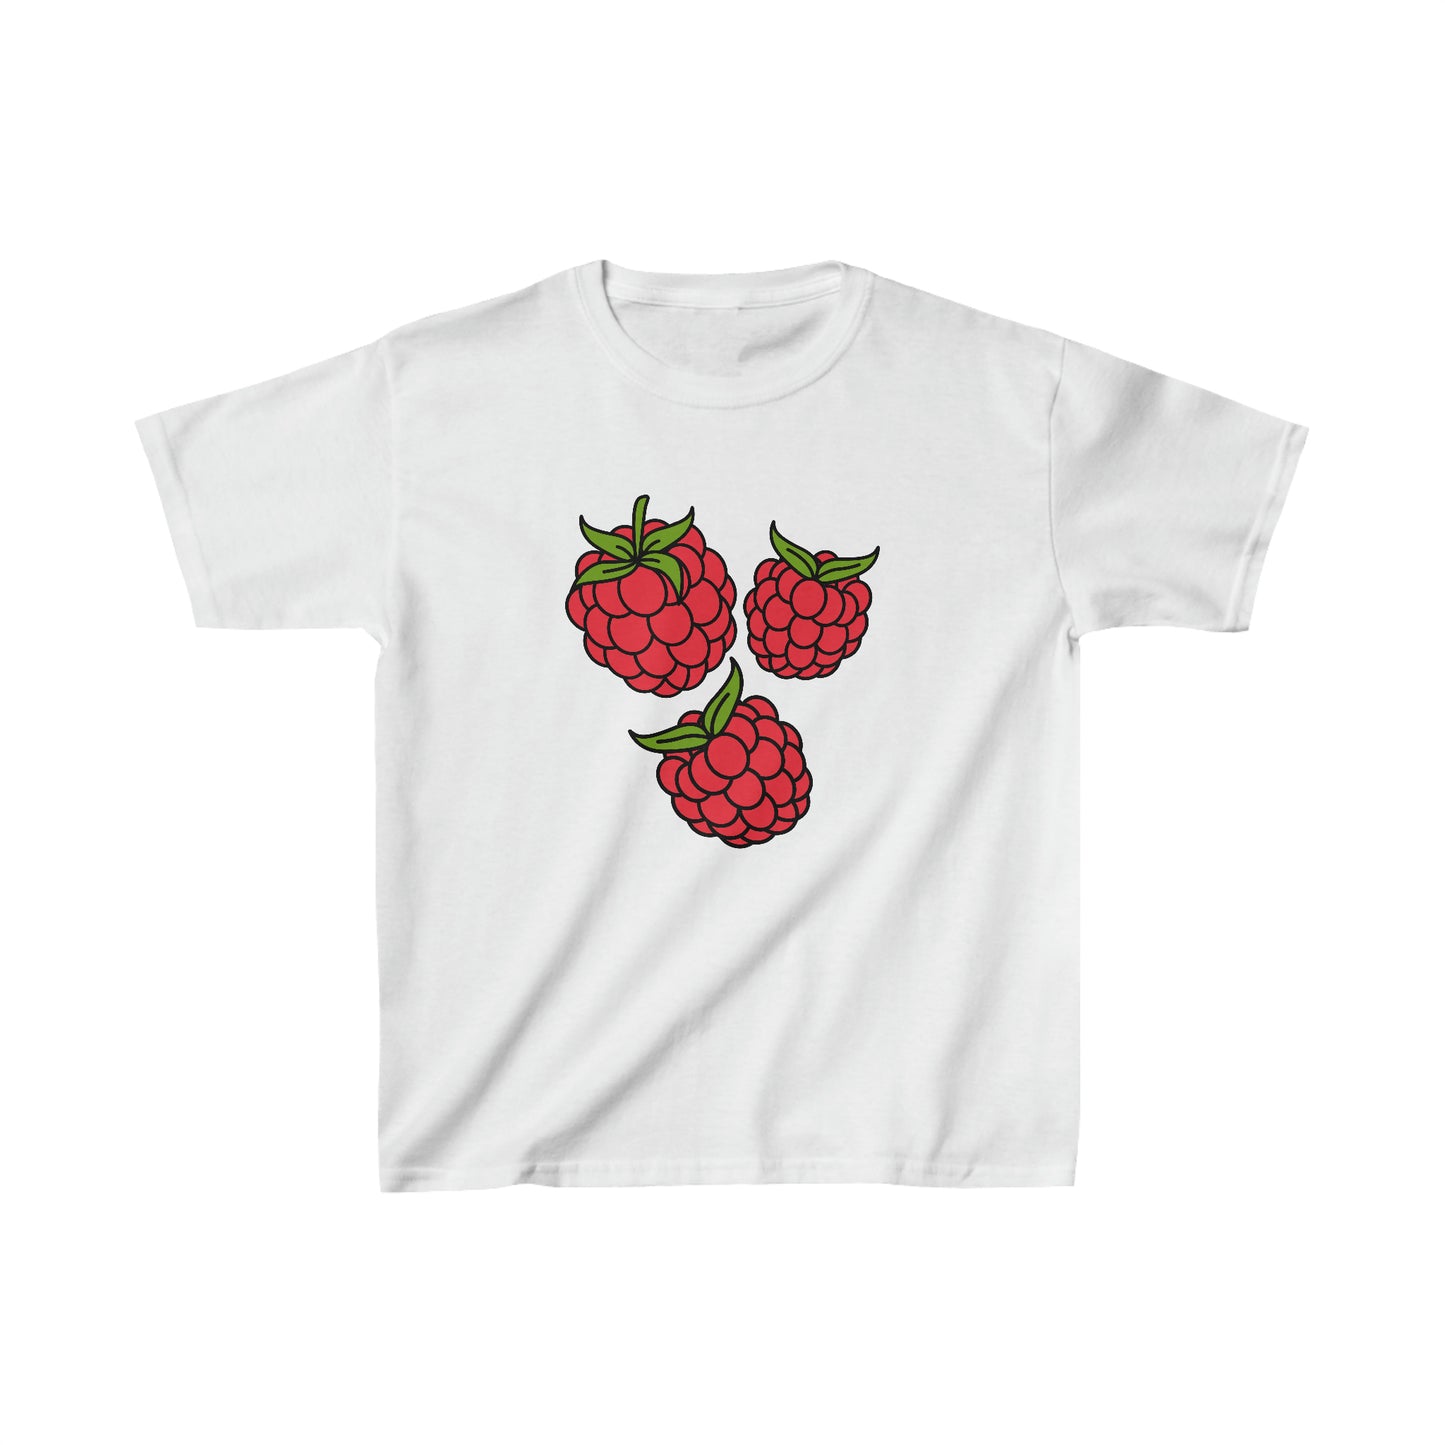 RASPBERRY double-sided t-shirt - child double-sided